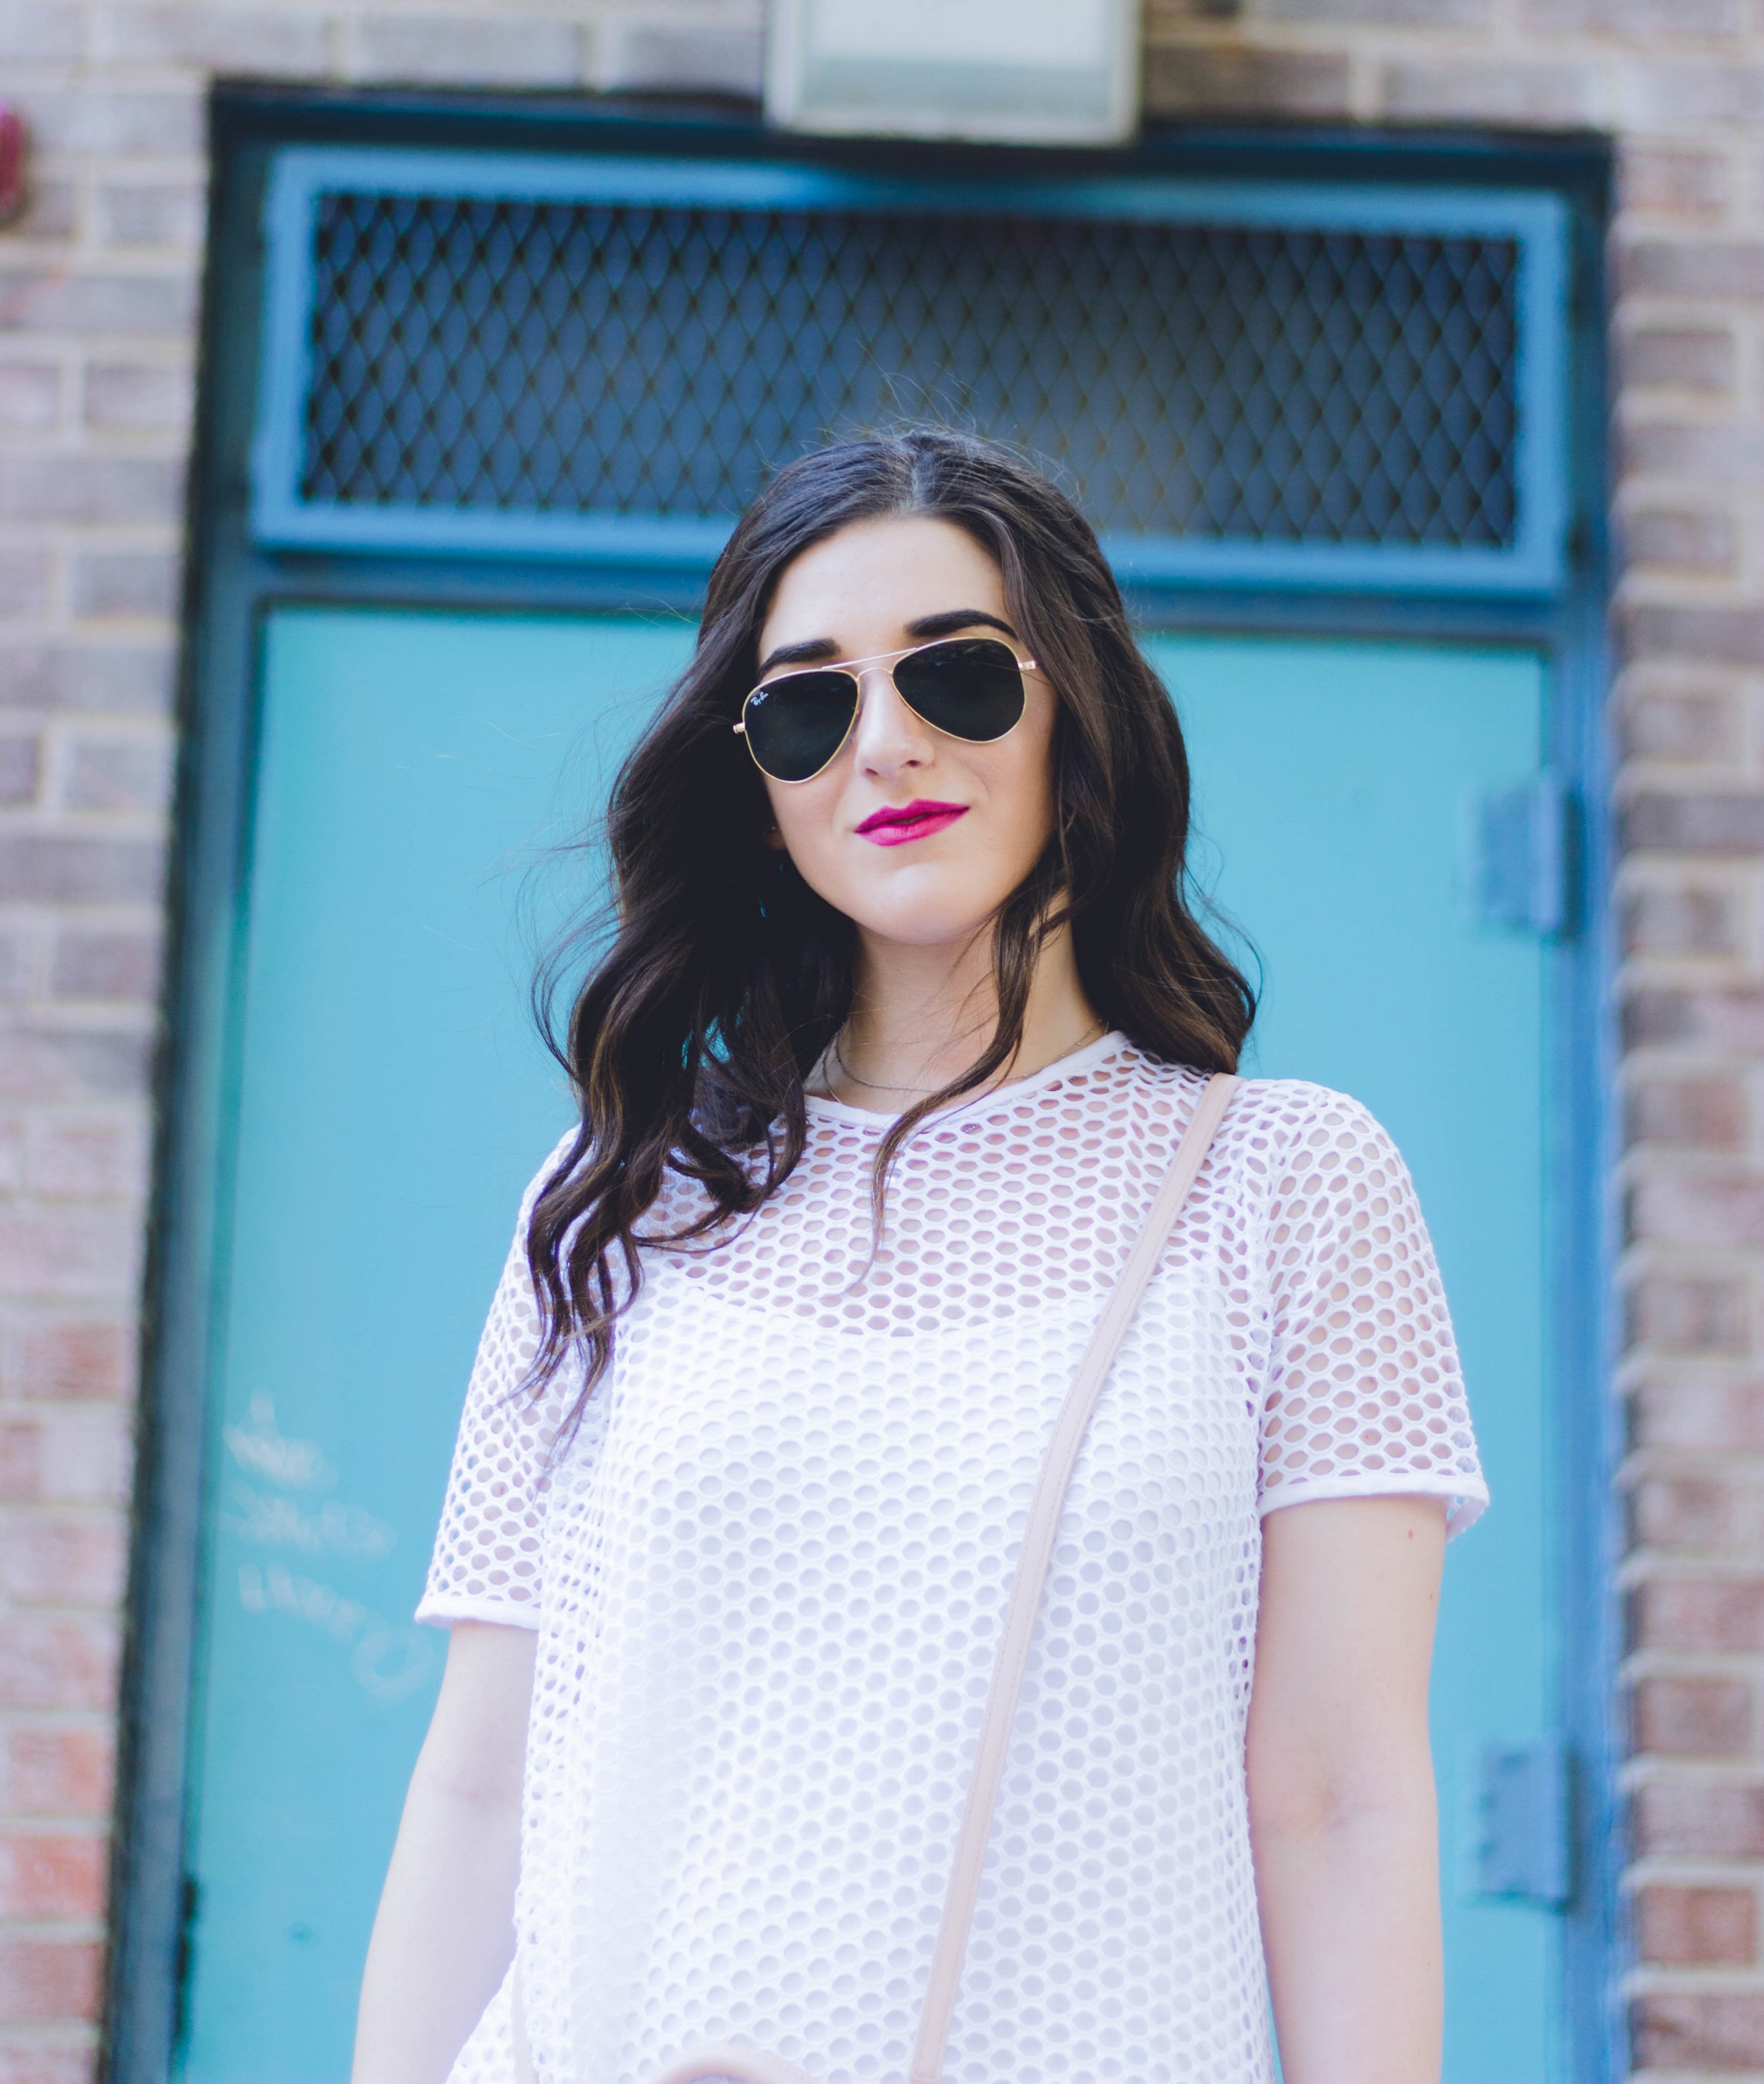 White Mesh Dress Love My Fiance Hate Being Engaged Esther Santer Fashion Blog NYC Street Style Blogger Outfit OOTD Trendy Summer Cork Wedges ASOS Dolce Vita Aviators Sunglasses RayBan Girl Women Look Inspiration Hair Beauty Model Photoshoot New  York.jpg